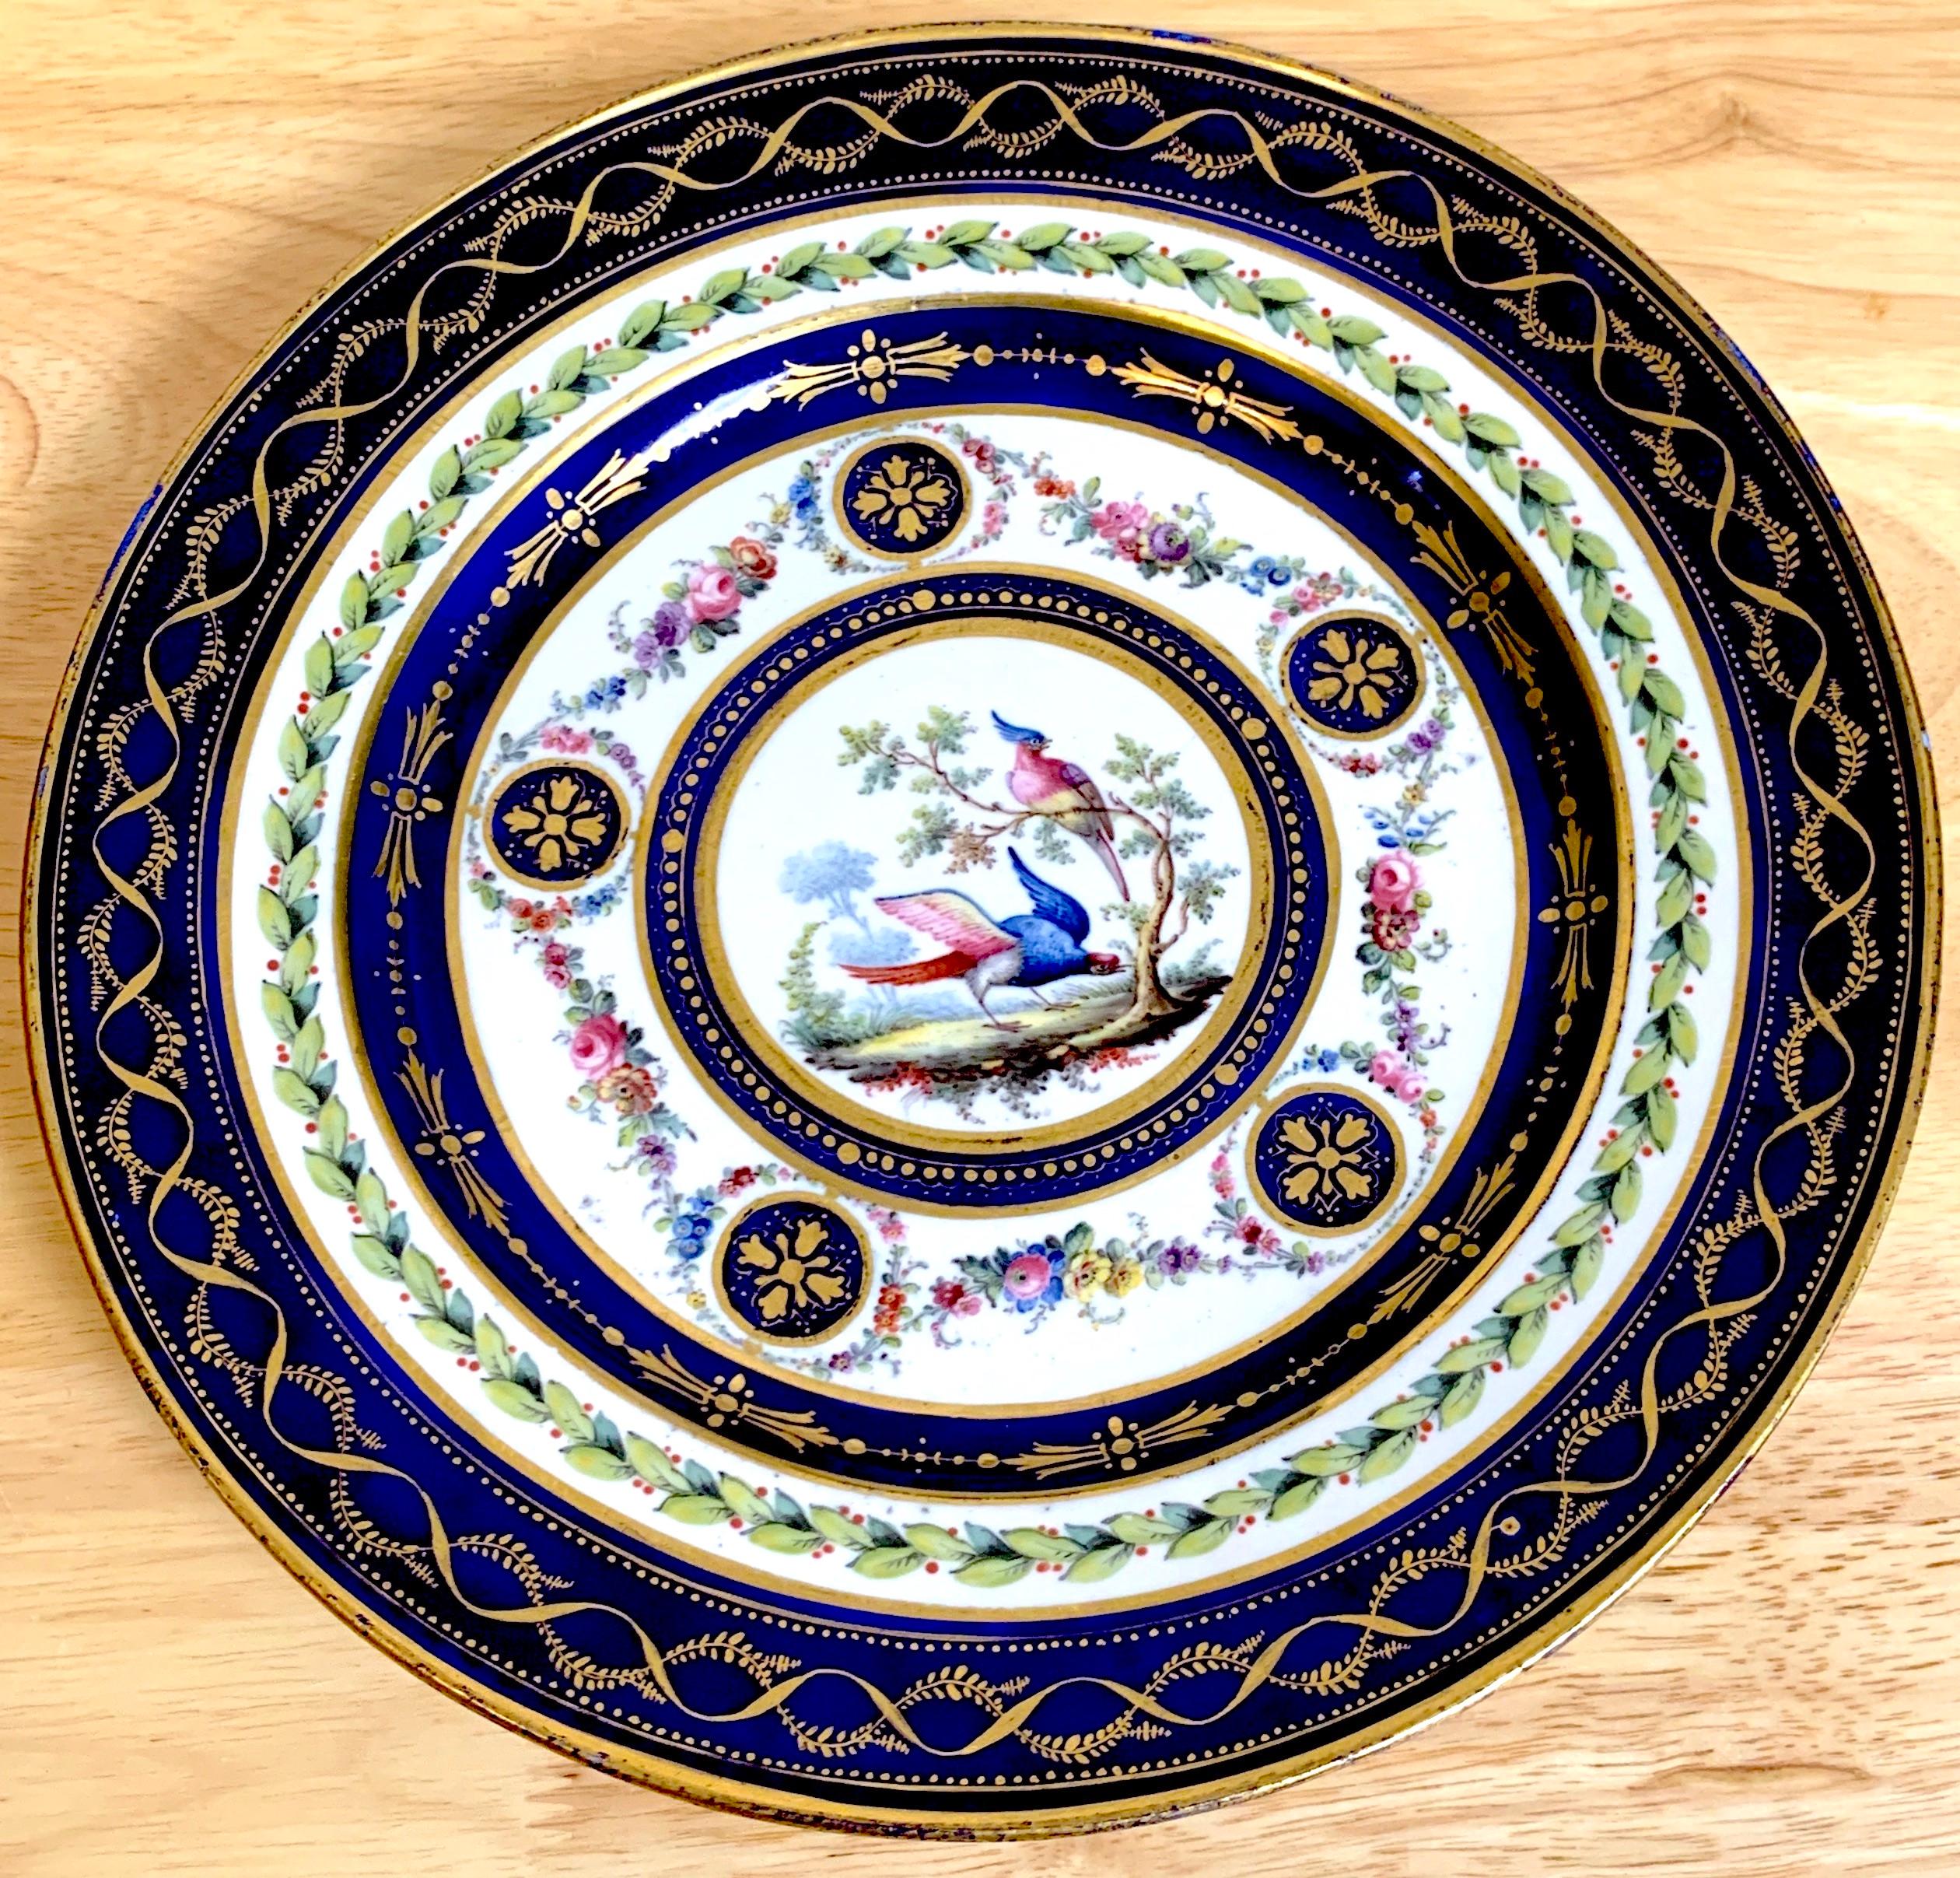 18th Century Sevres Ornithological Pattern Plate, 1759-60  
With numerous blue underglaze date, painters, gilder marks. 

A exquisite piece of Sevres porcelain, this 18th-century ornithological pattern plate is a true treasure from the renowned